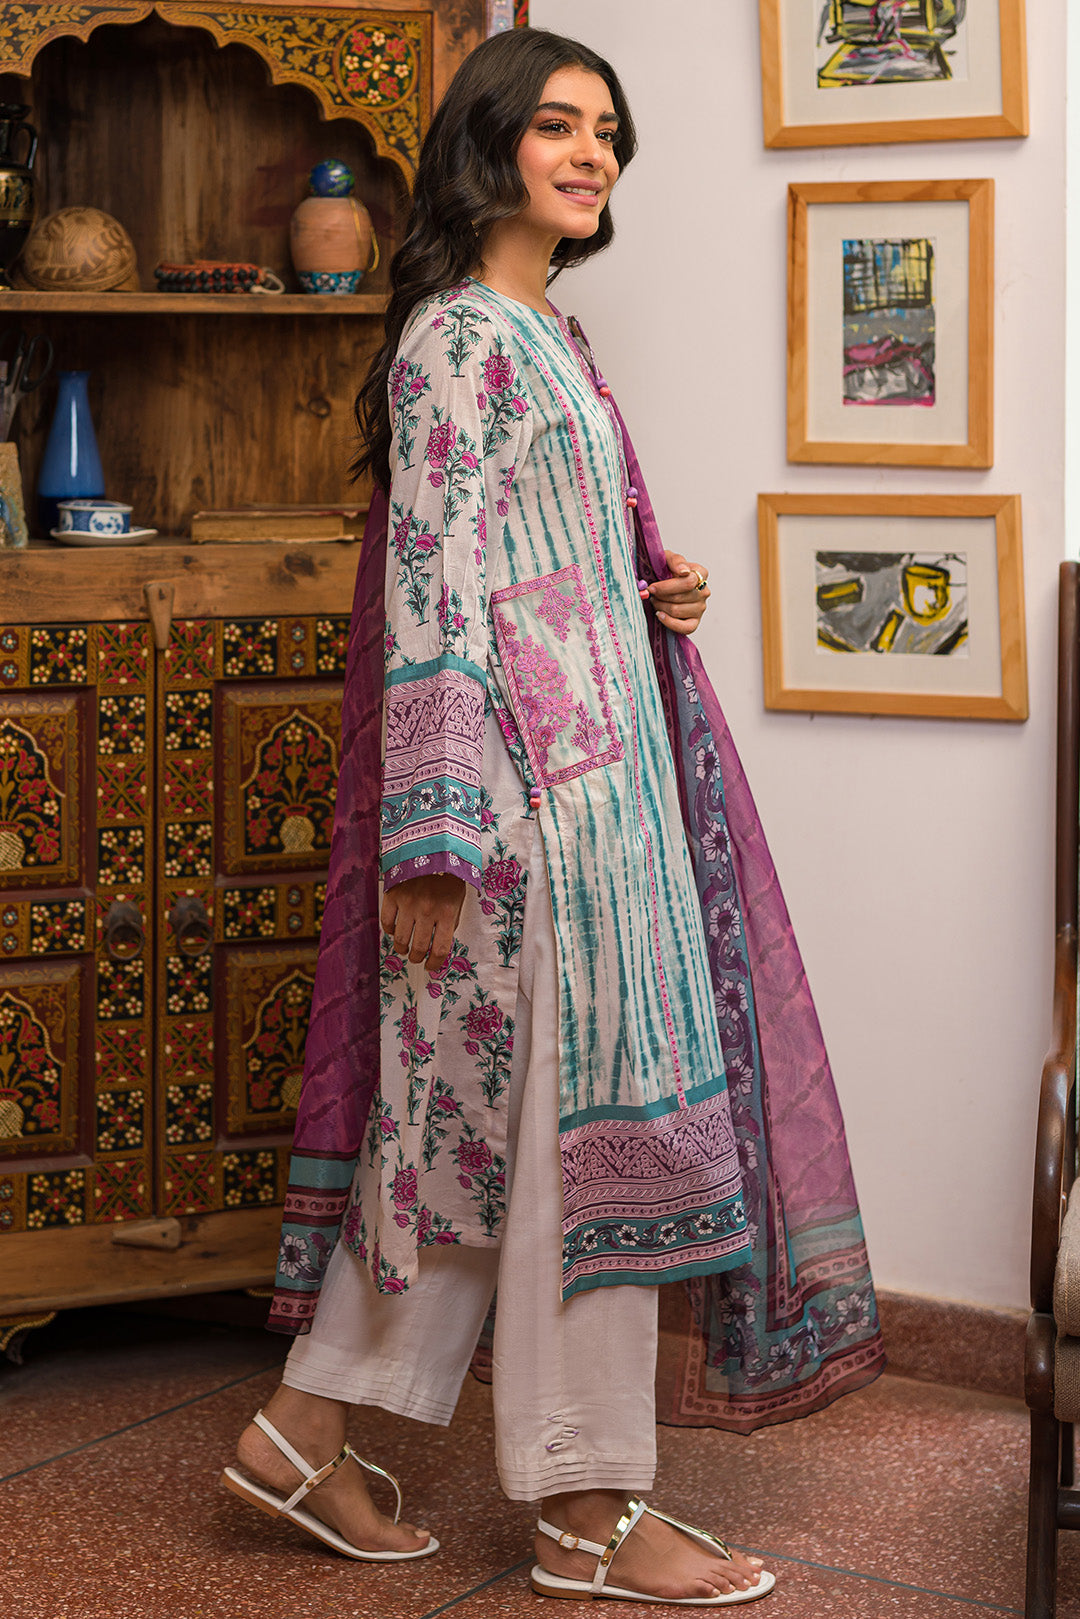 2 Piece - Embroidered Digital Printed Lawn Suit P0699